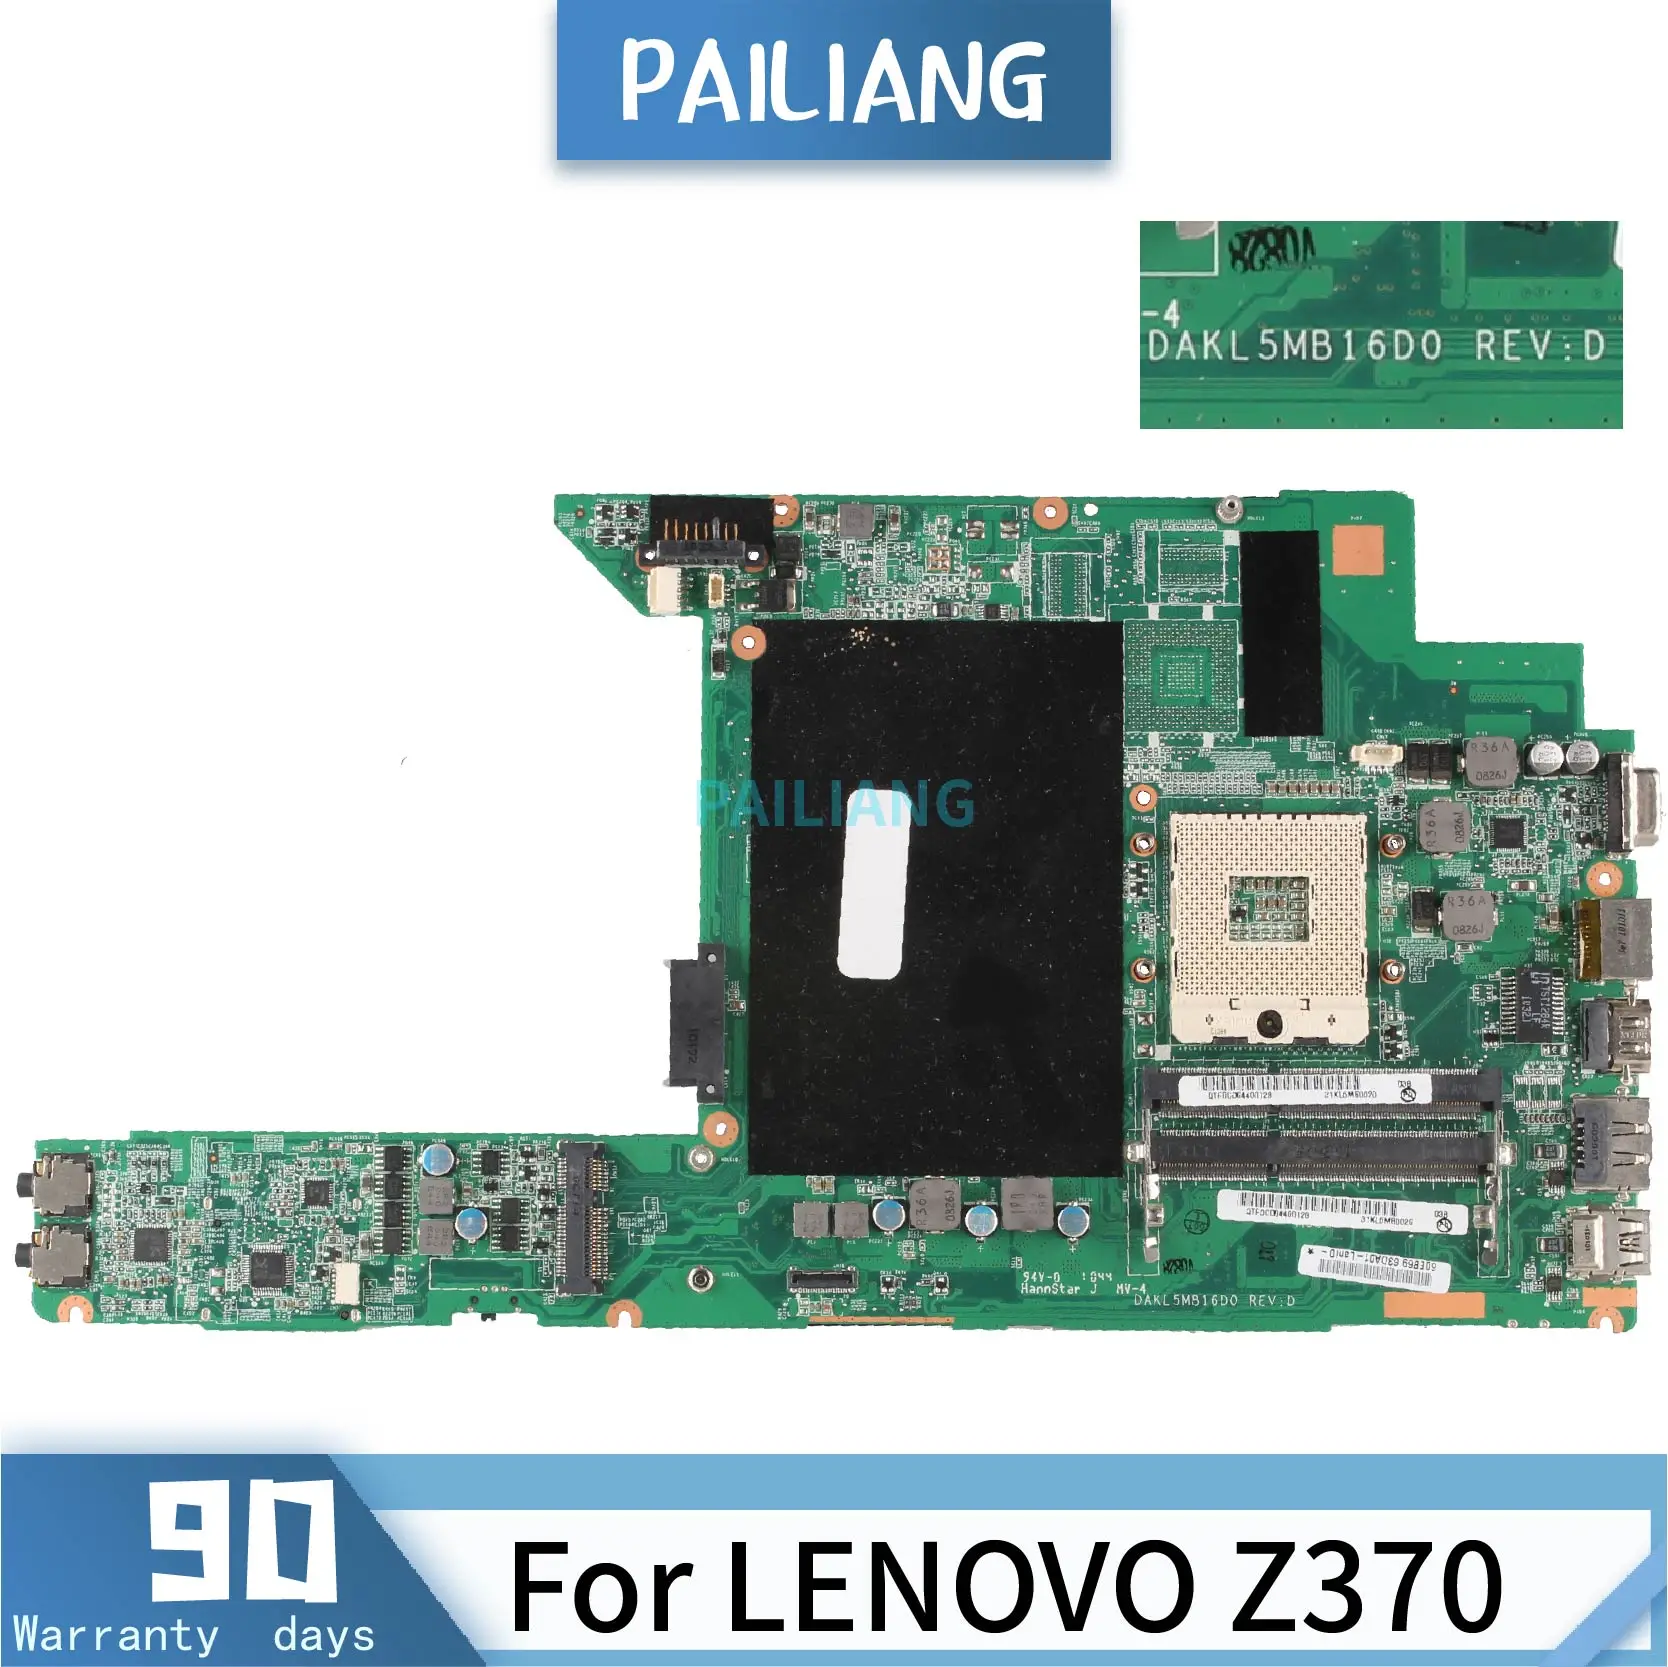 

PAILIANG Laptop motherboard For LENOVO Z370 DAKL5MB16H0 Mainboard Core HM65 TESTED DDR3